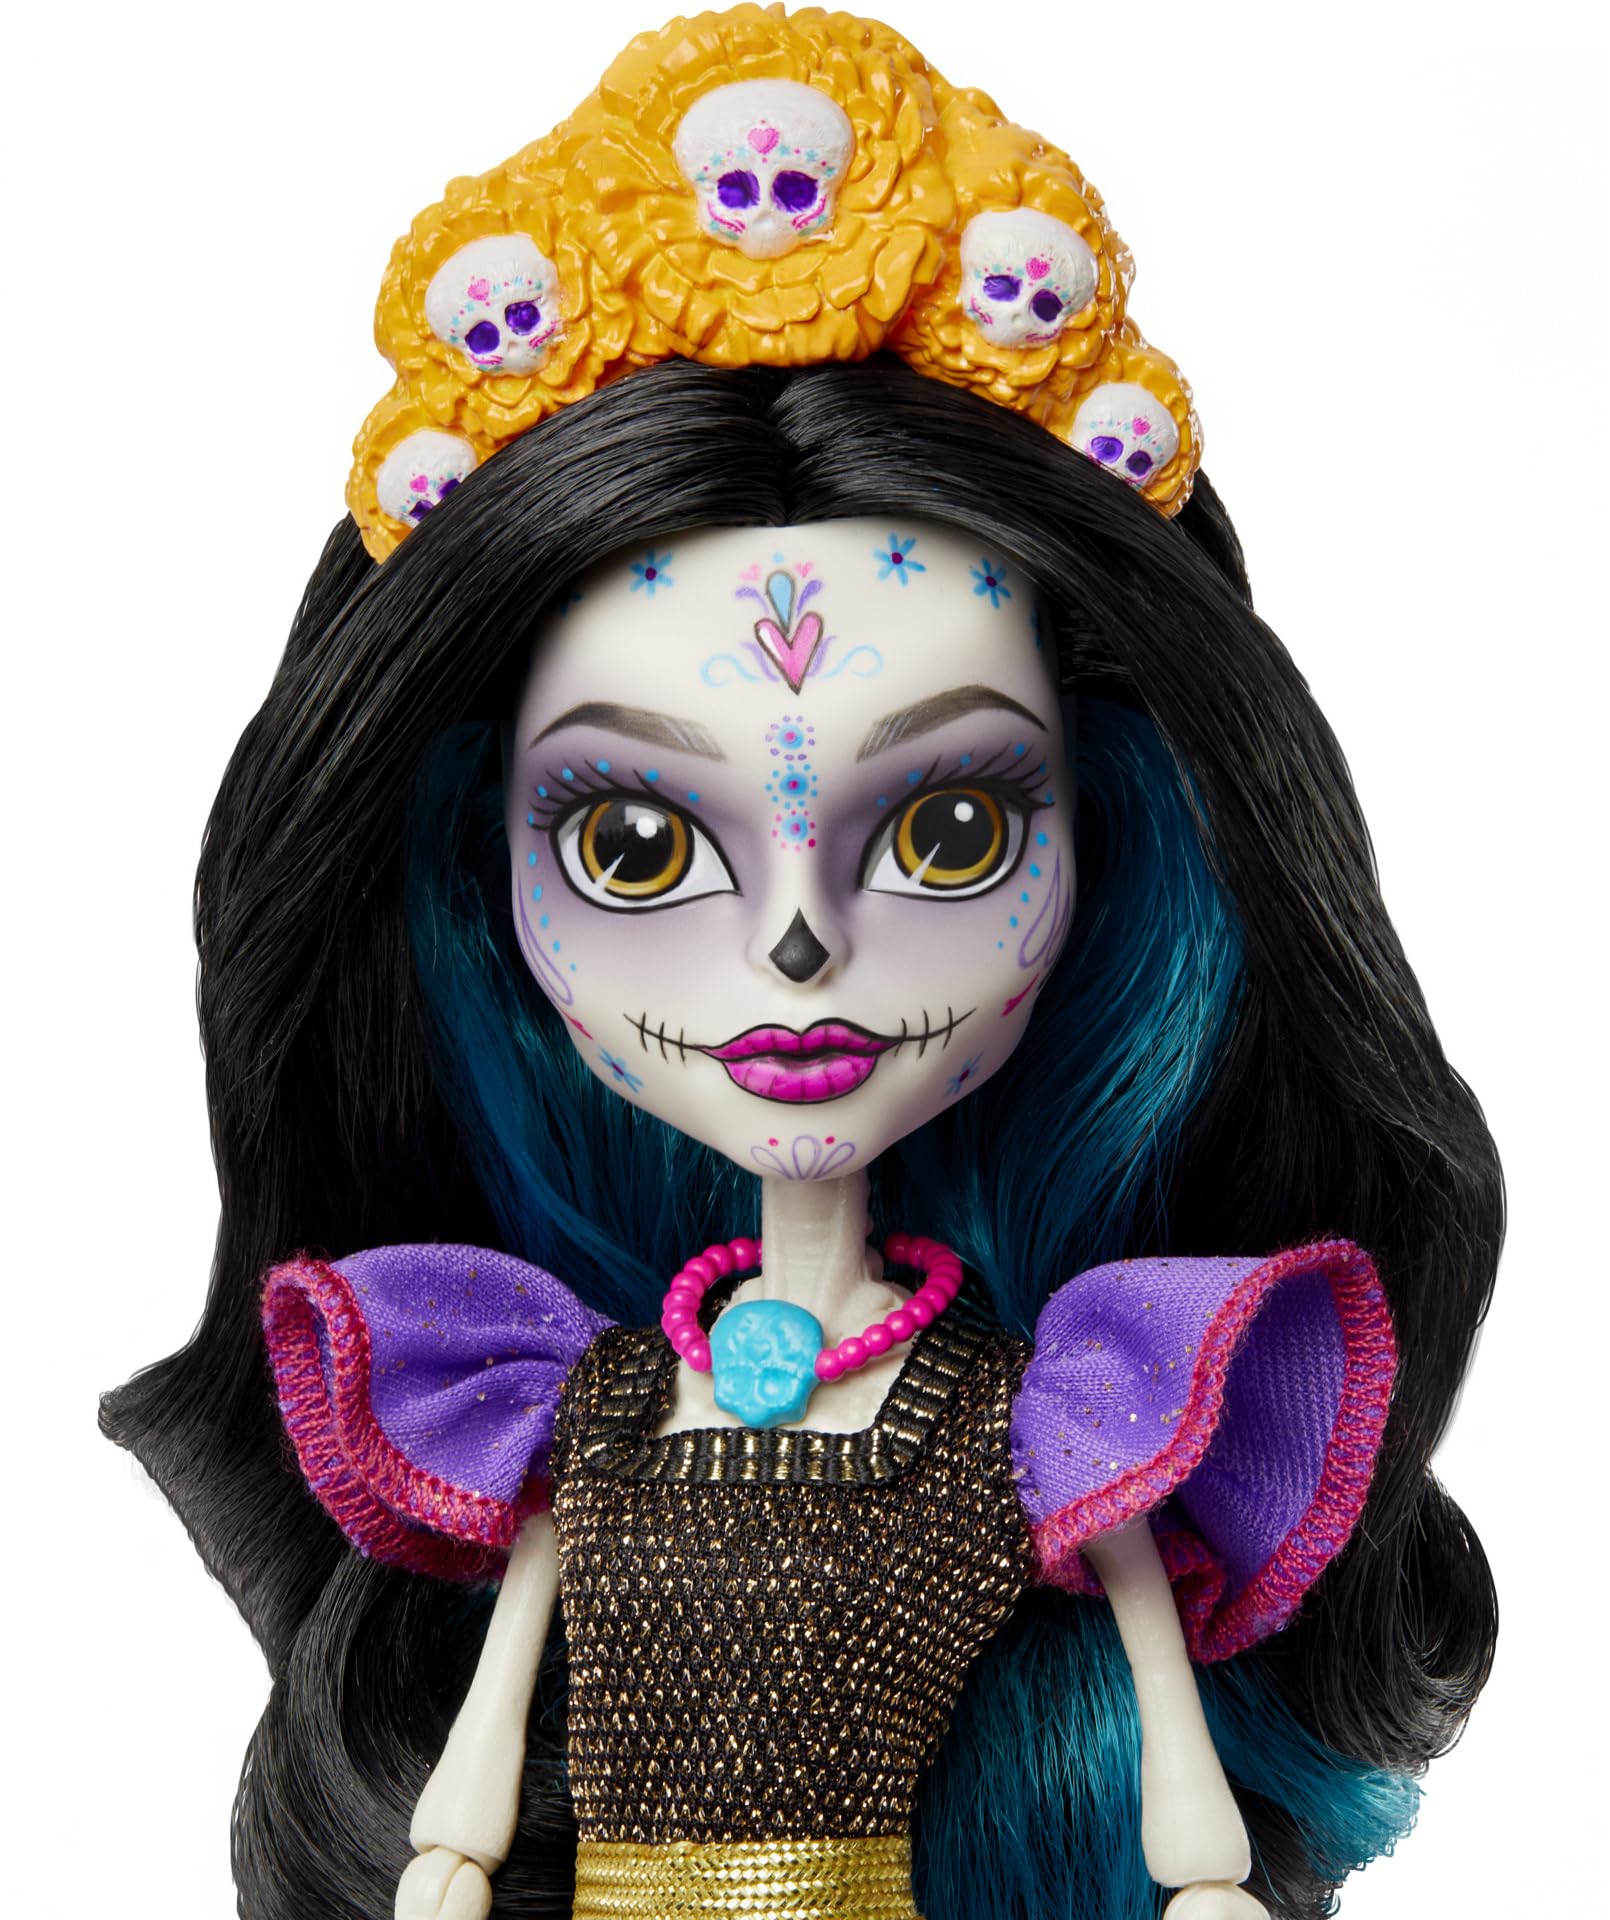 Monster High Doll, Skelita Calaveras Día De Muertos Collectible with Displayable Packaging, Colorful Fashion with Traditional Details